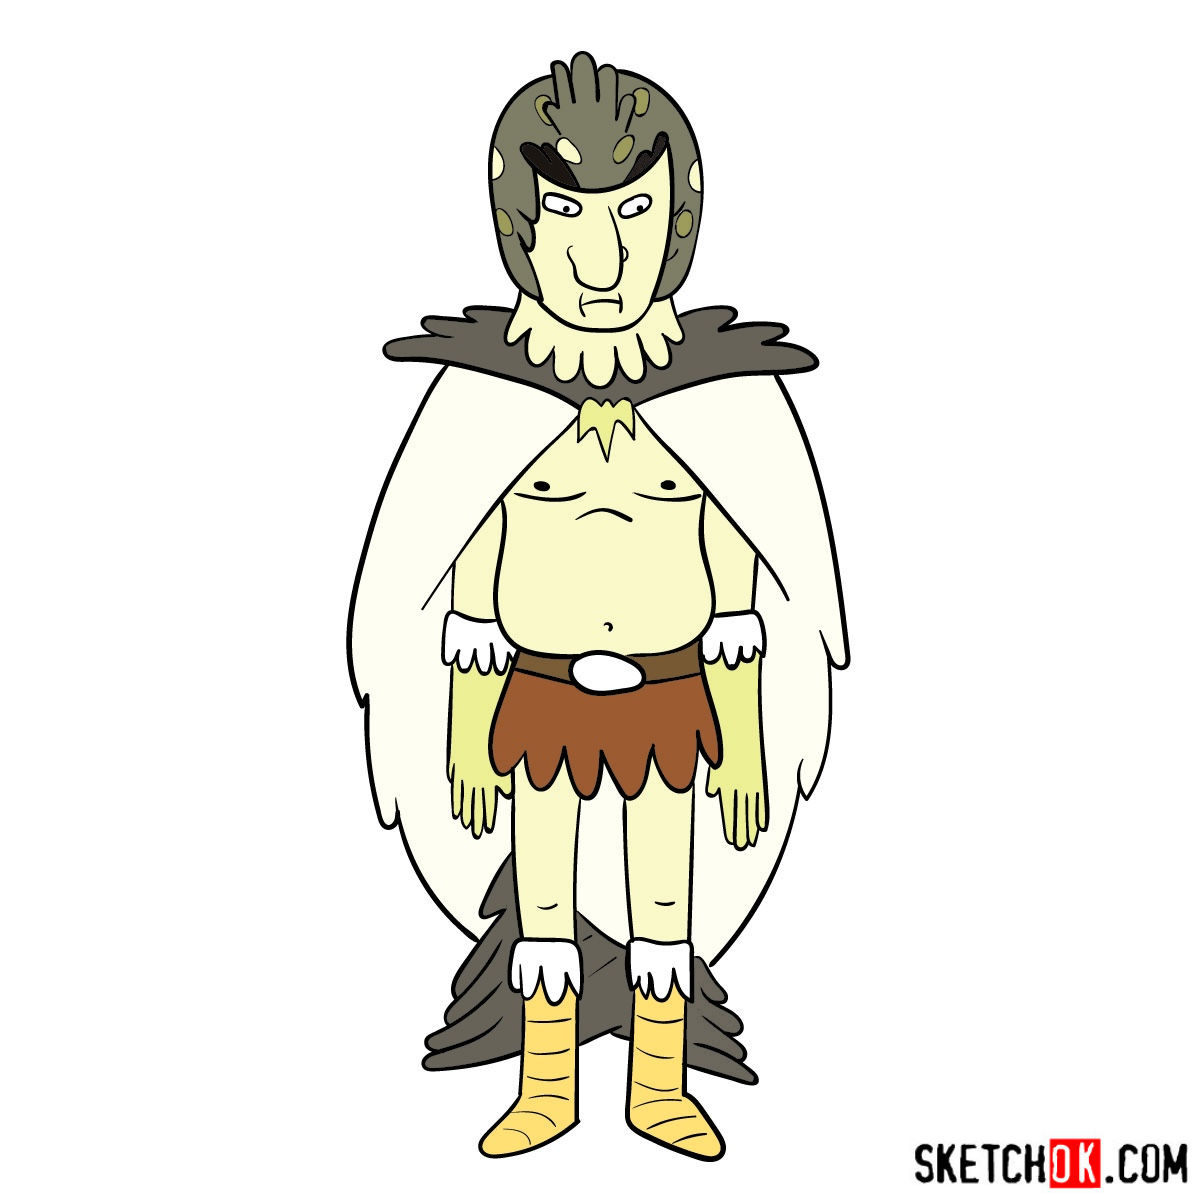 How to draw Birdperson from Rick and Morty series